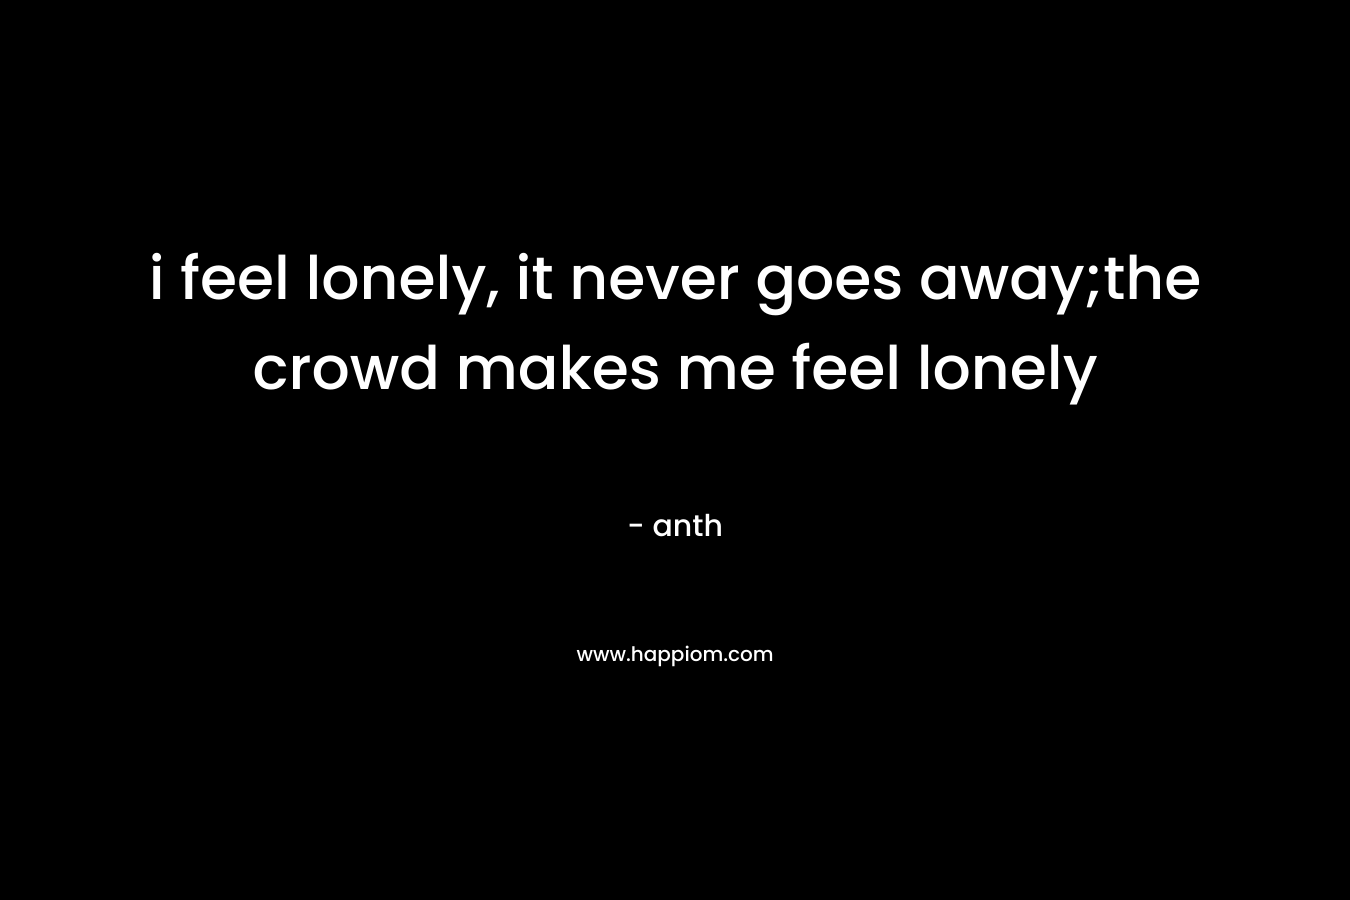 i feel lonely, it never goes away;the crowd makes me feel lonely